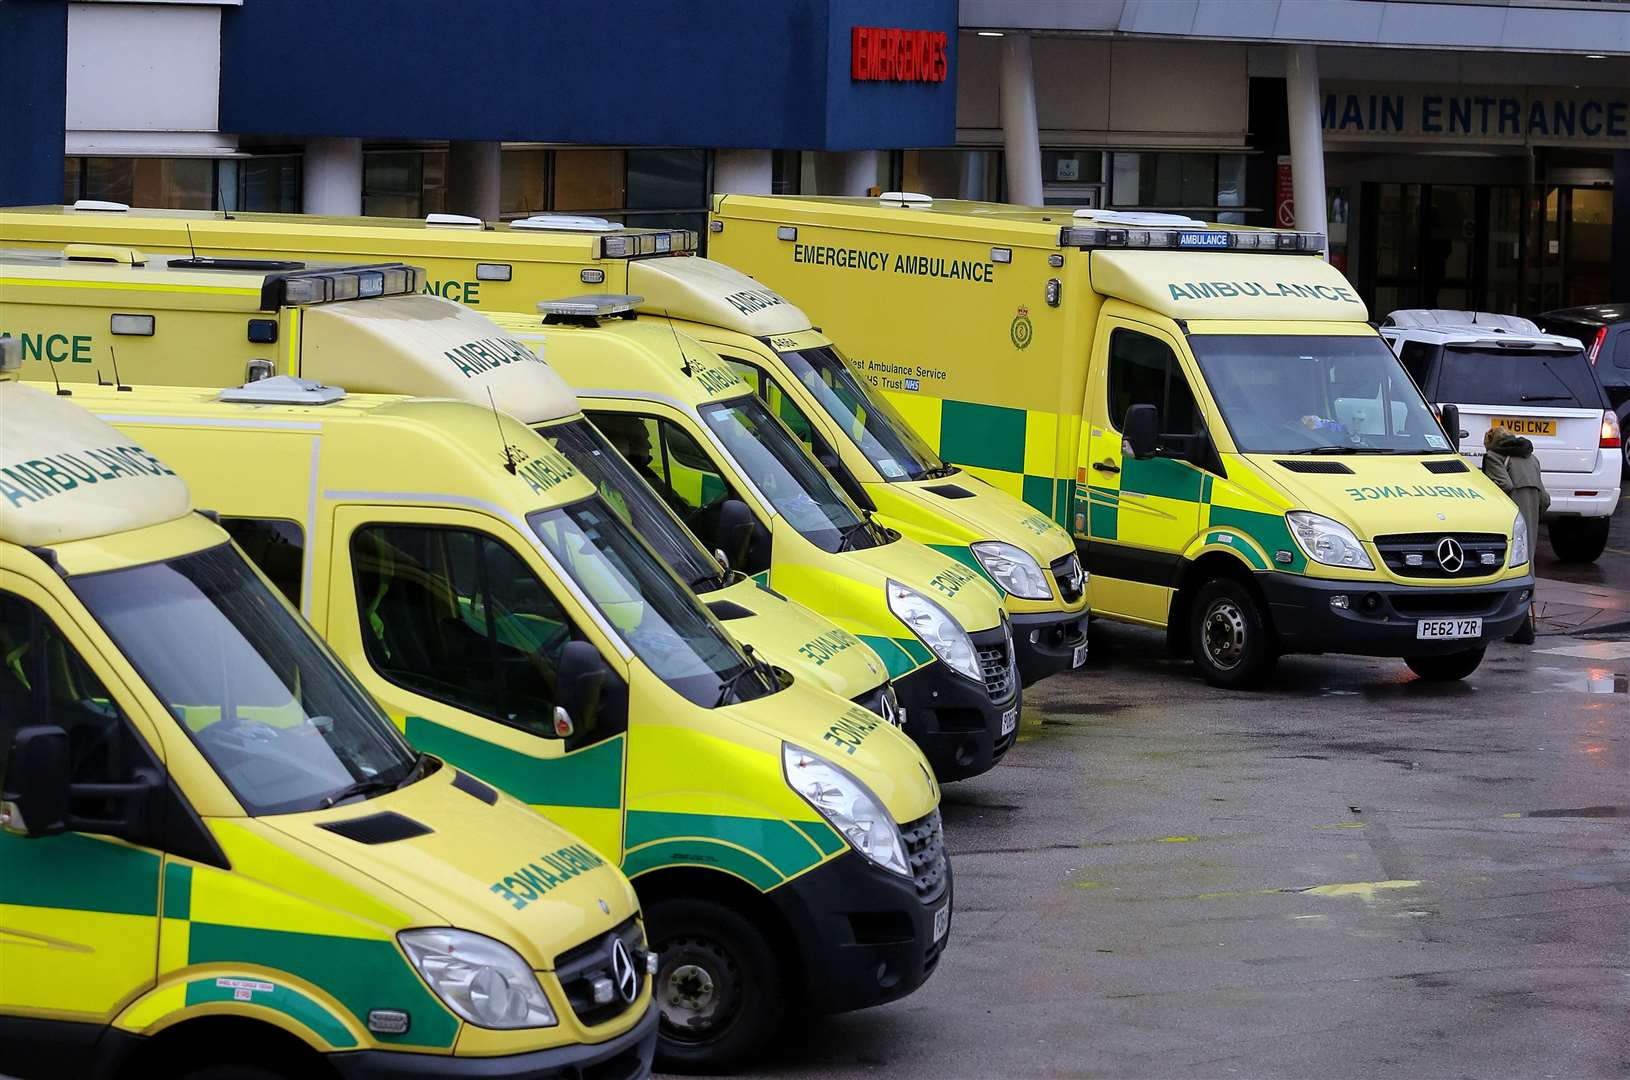 More than 15,000 ambulance workers across 11 trusts in England and Wales begin voting on strike action today